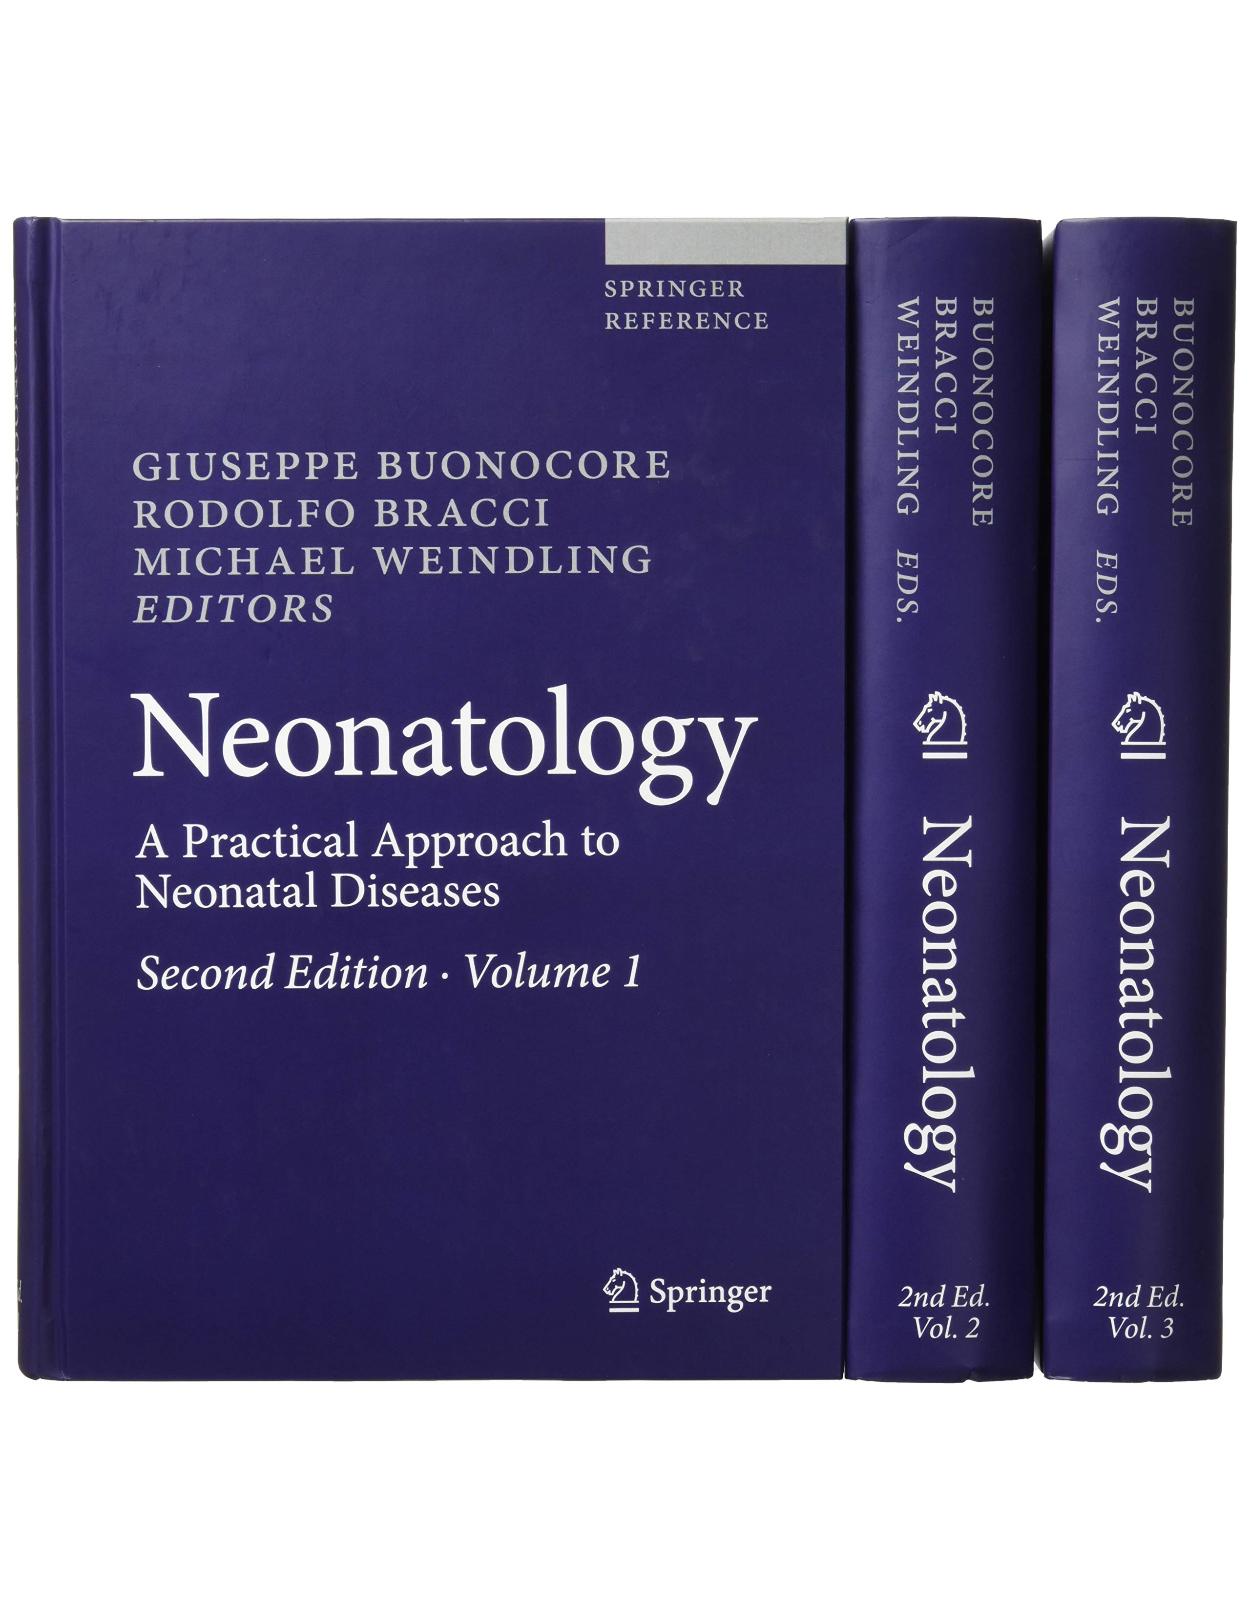 Neonatology.A Practical Approach to Neonatal Diseases